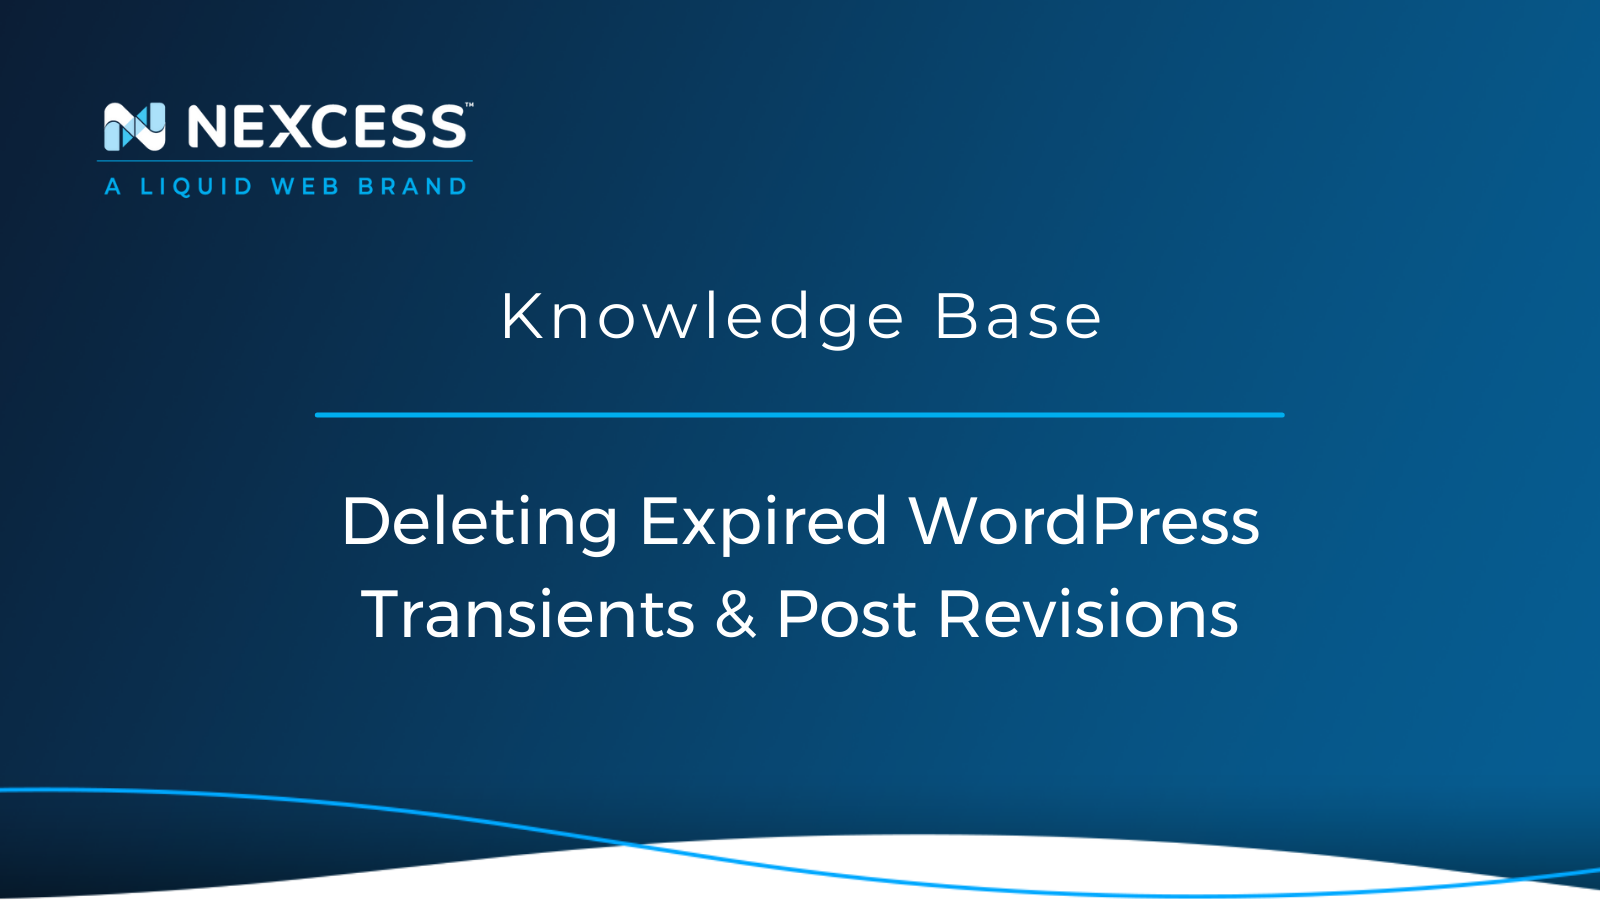 Deleting Expired WordPress Transients & Post Revisions